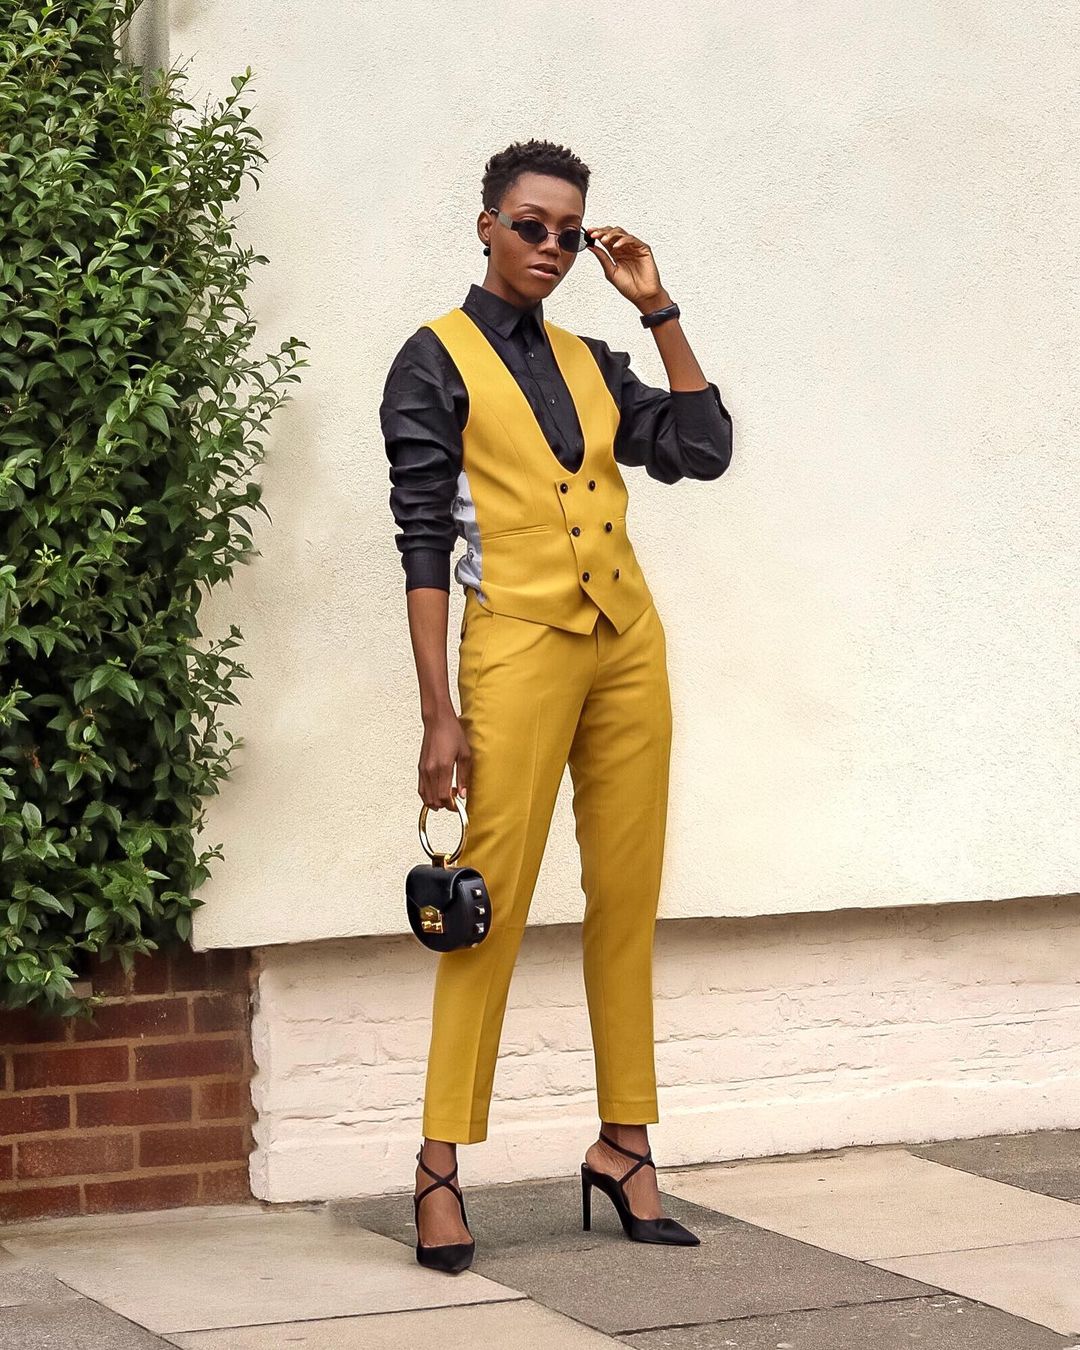 stylish-androgynous-work-outfit-ideas-will-captivate-audience-hello-girl-boss